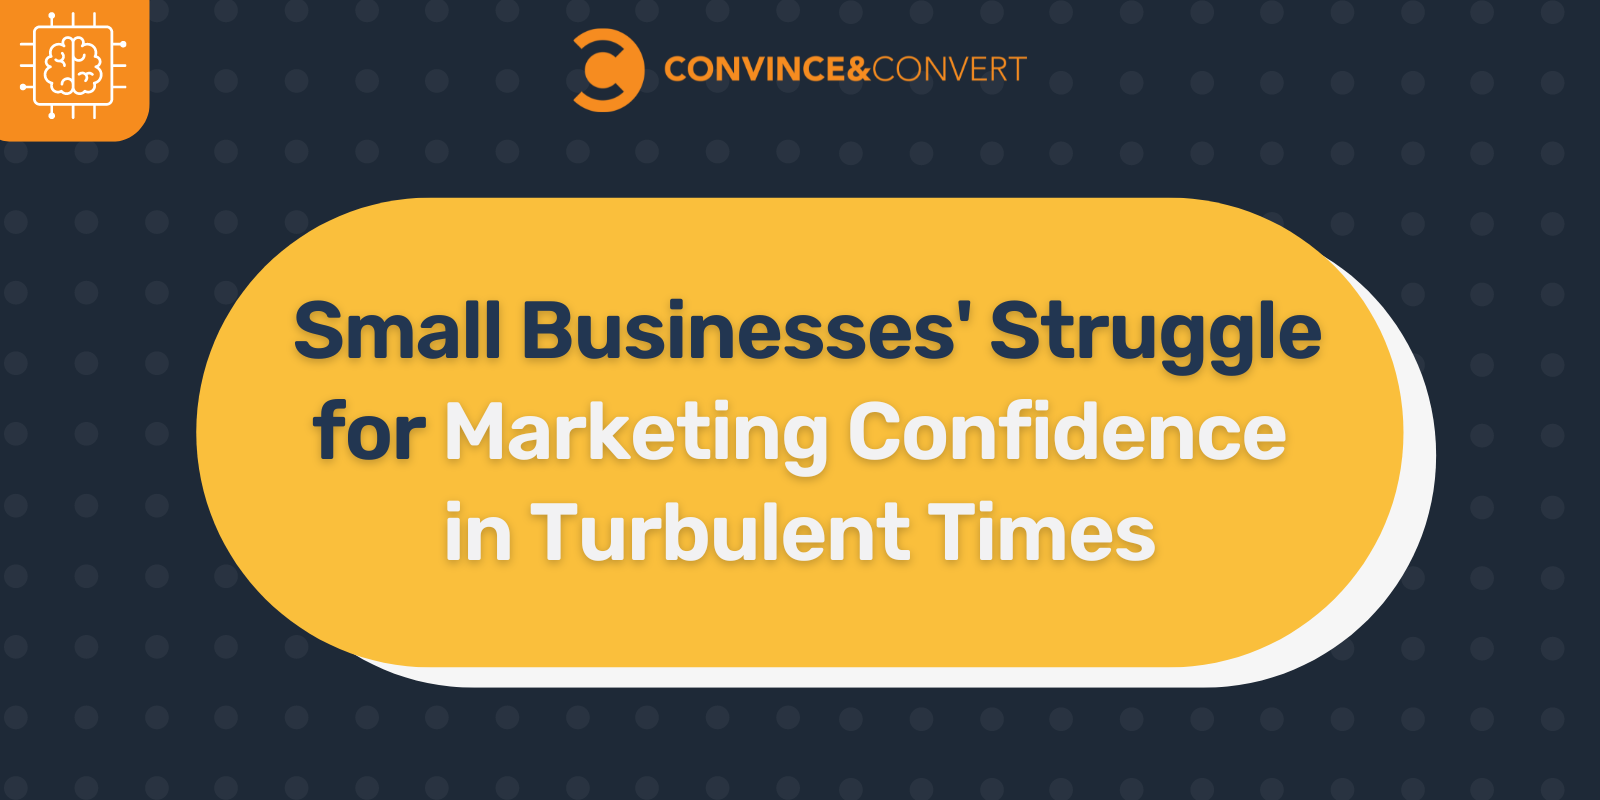 Small Businesses' Struggle for Marketing Confidence in Turbulent Times (5 minute read)